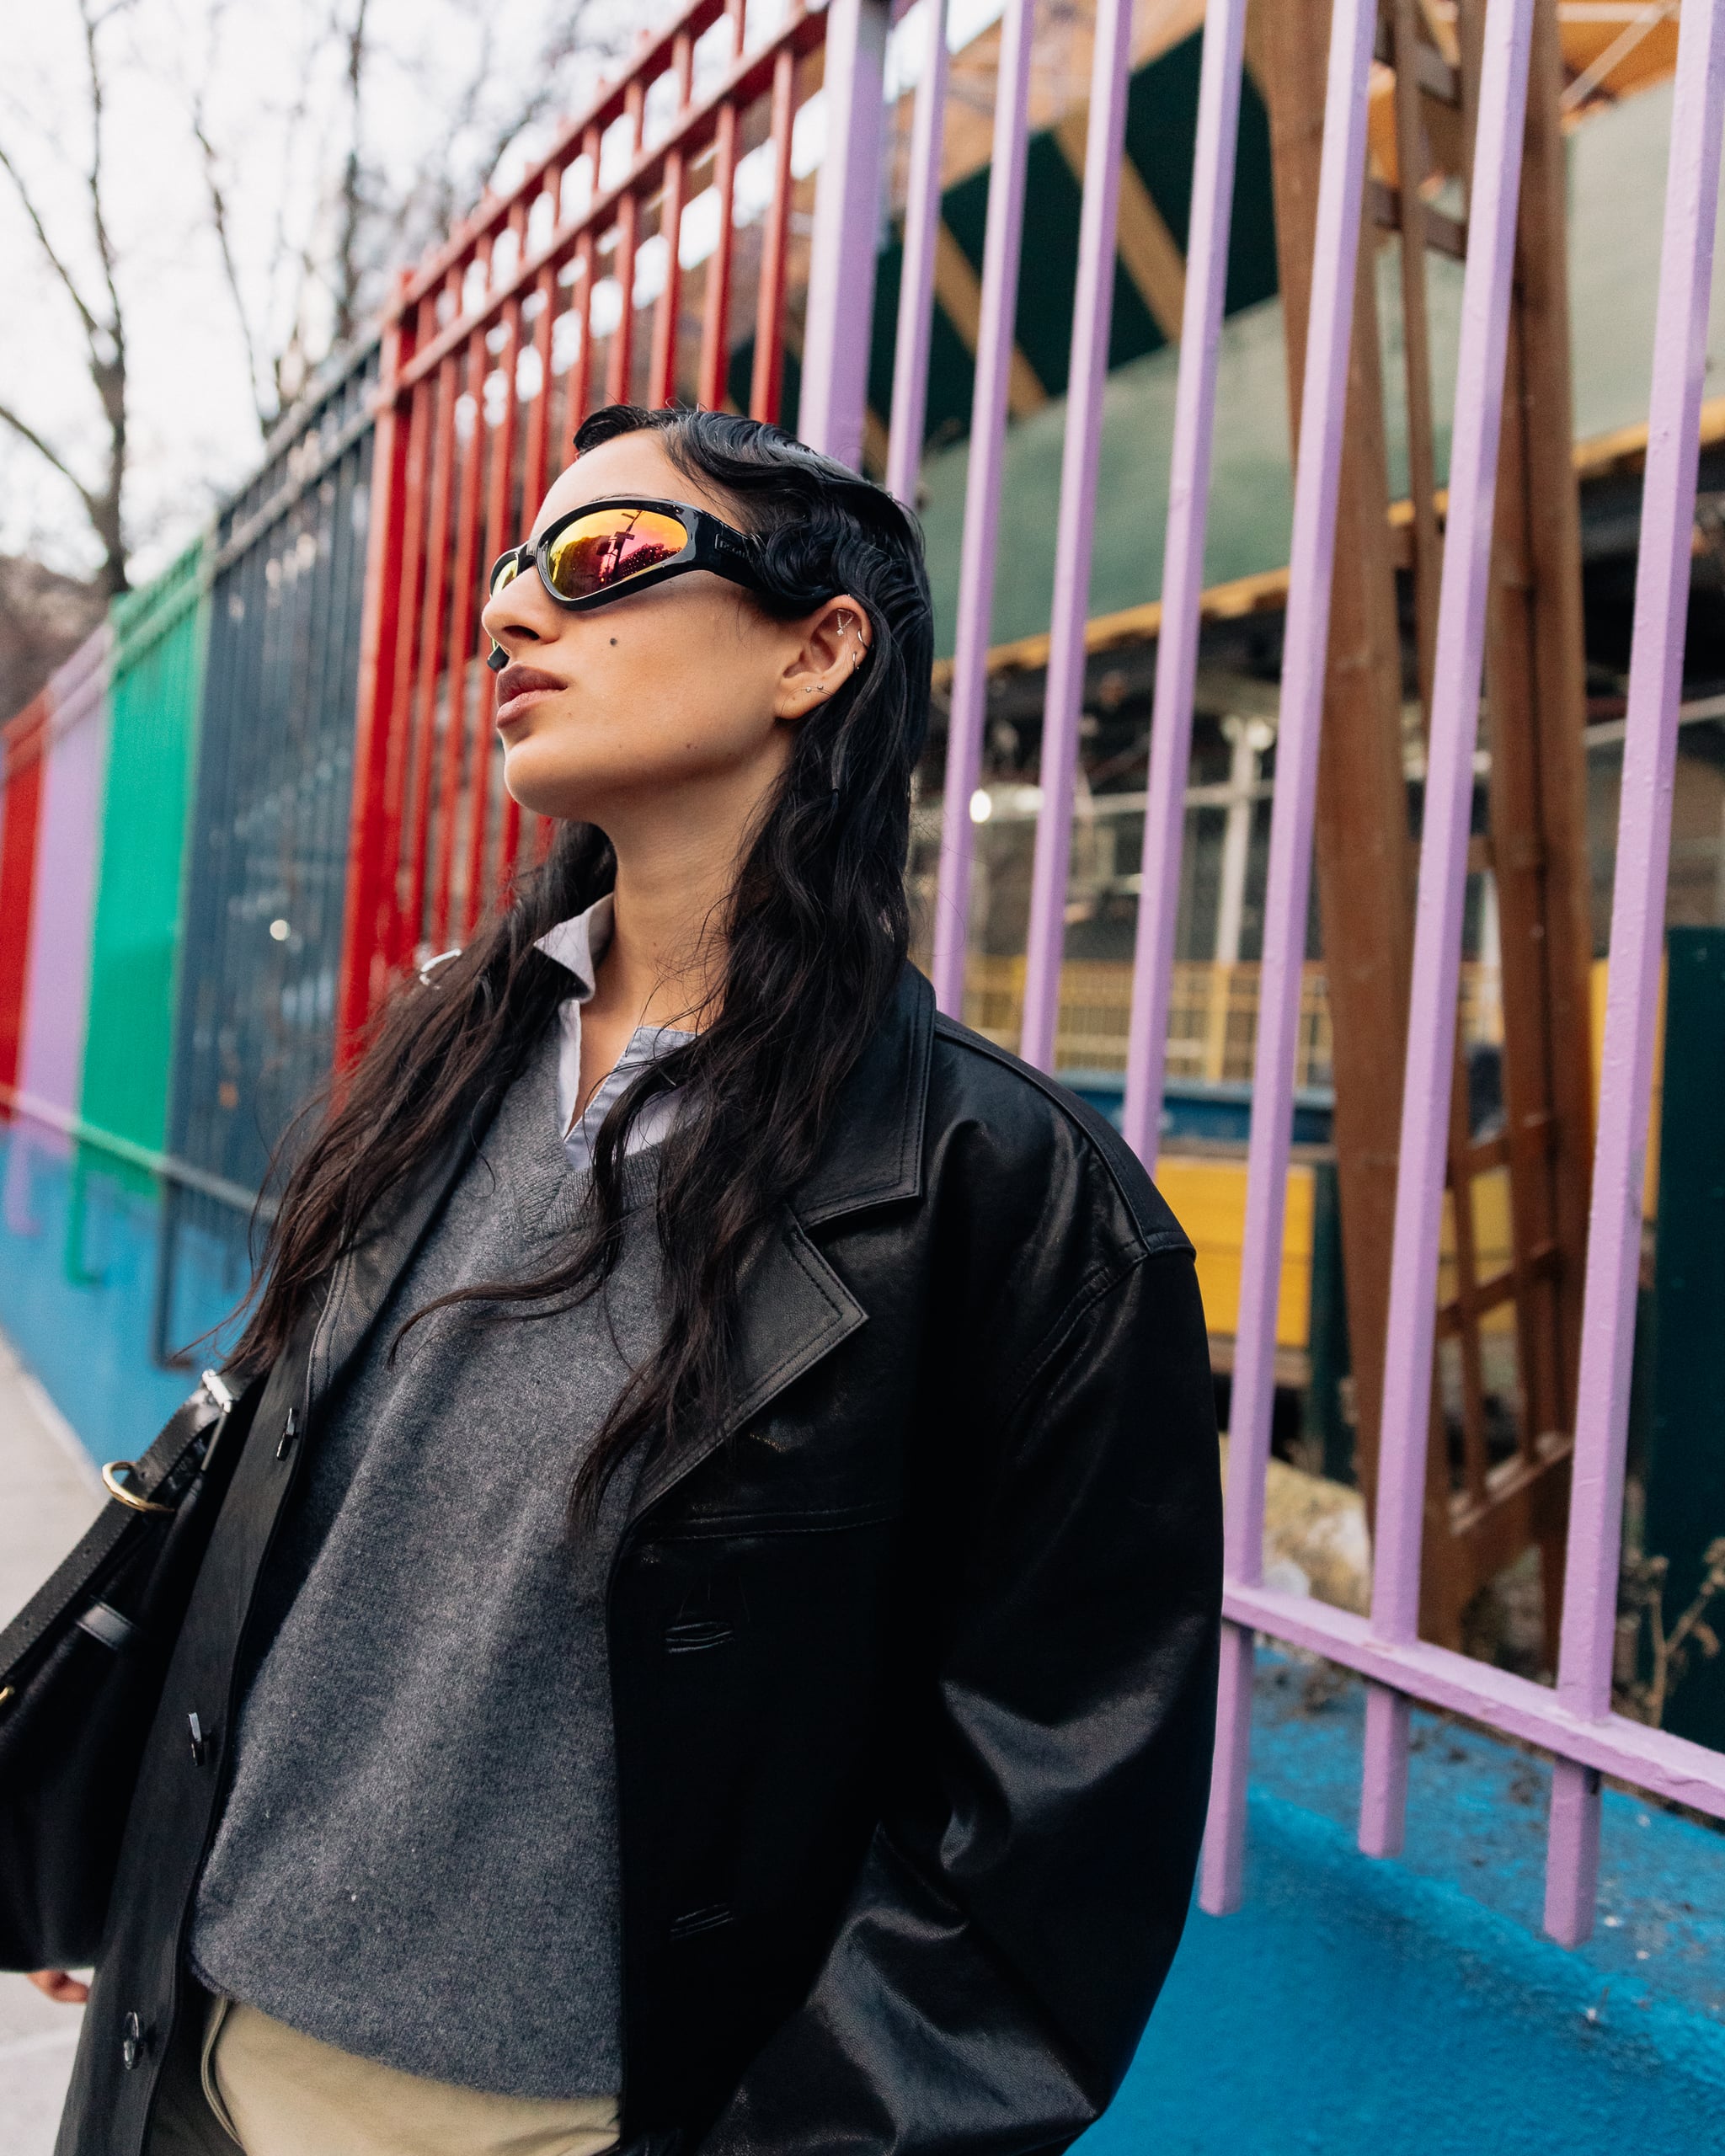 6 Sunglasses Trends For 2023